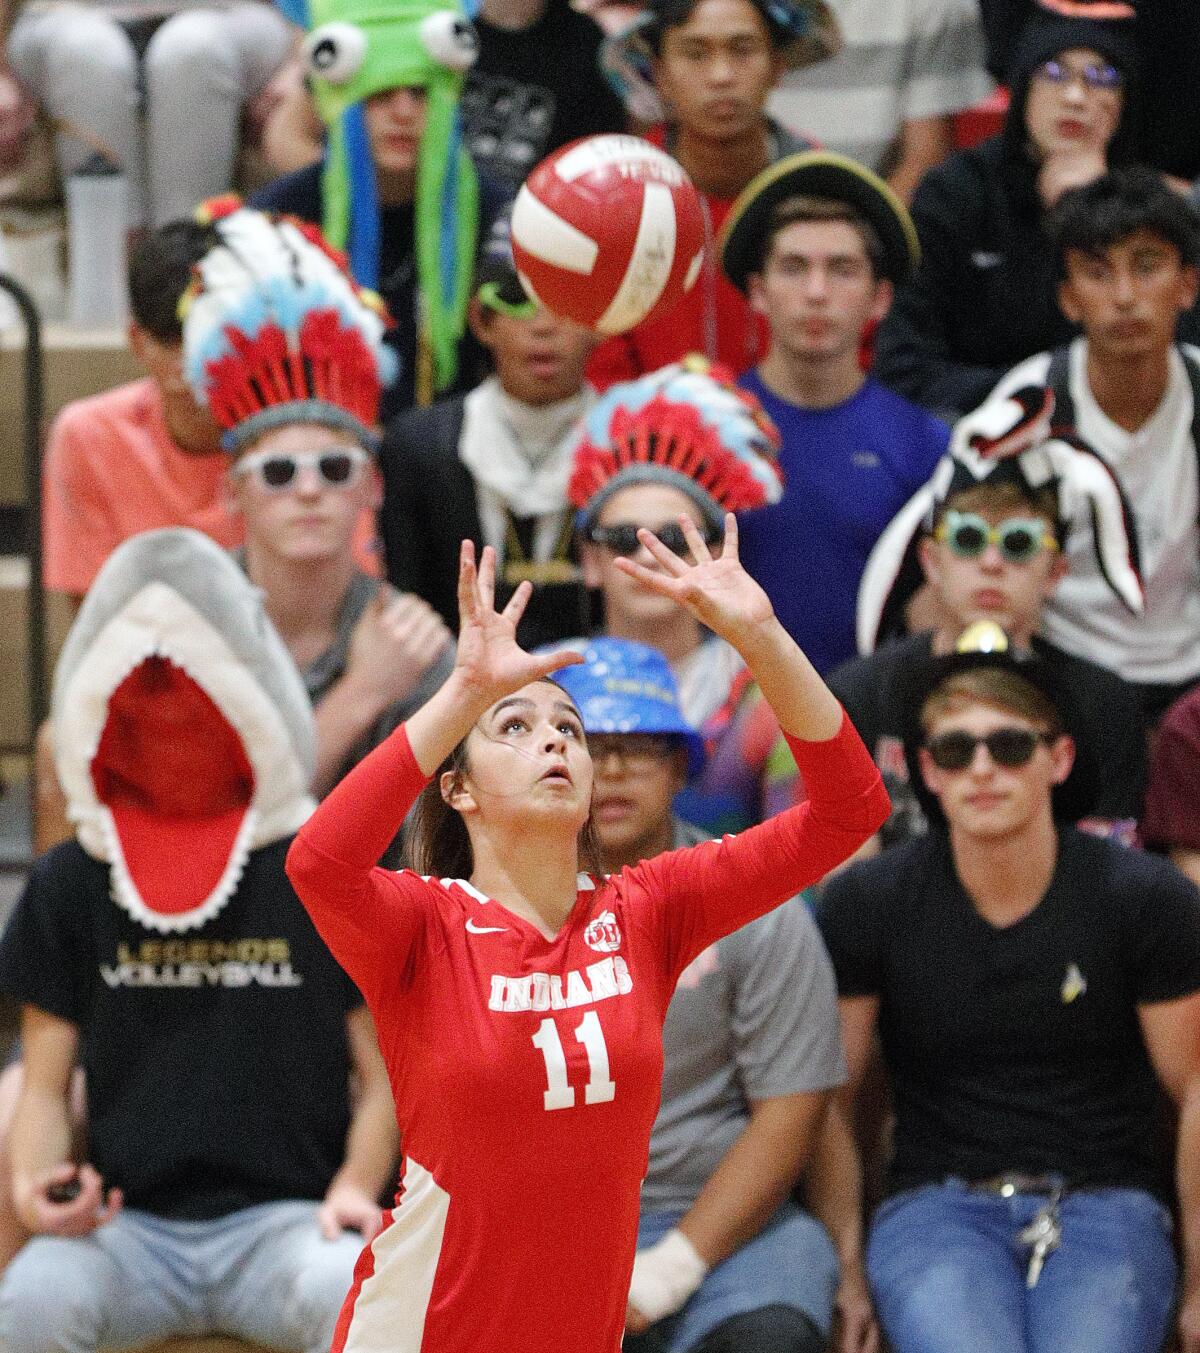 Burroughs' Catie Virtue, with many Burroughs fans in Halloween costumes, sets the ball for a kill against Murrieta Valley in a CIF Division II playoff girls' volleyball match at Burroughs High School on Thursday, October 24, 2019. Murrieta Valley won the match 3-0.